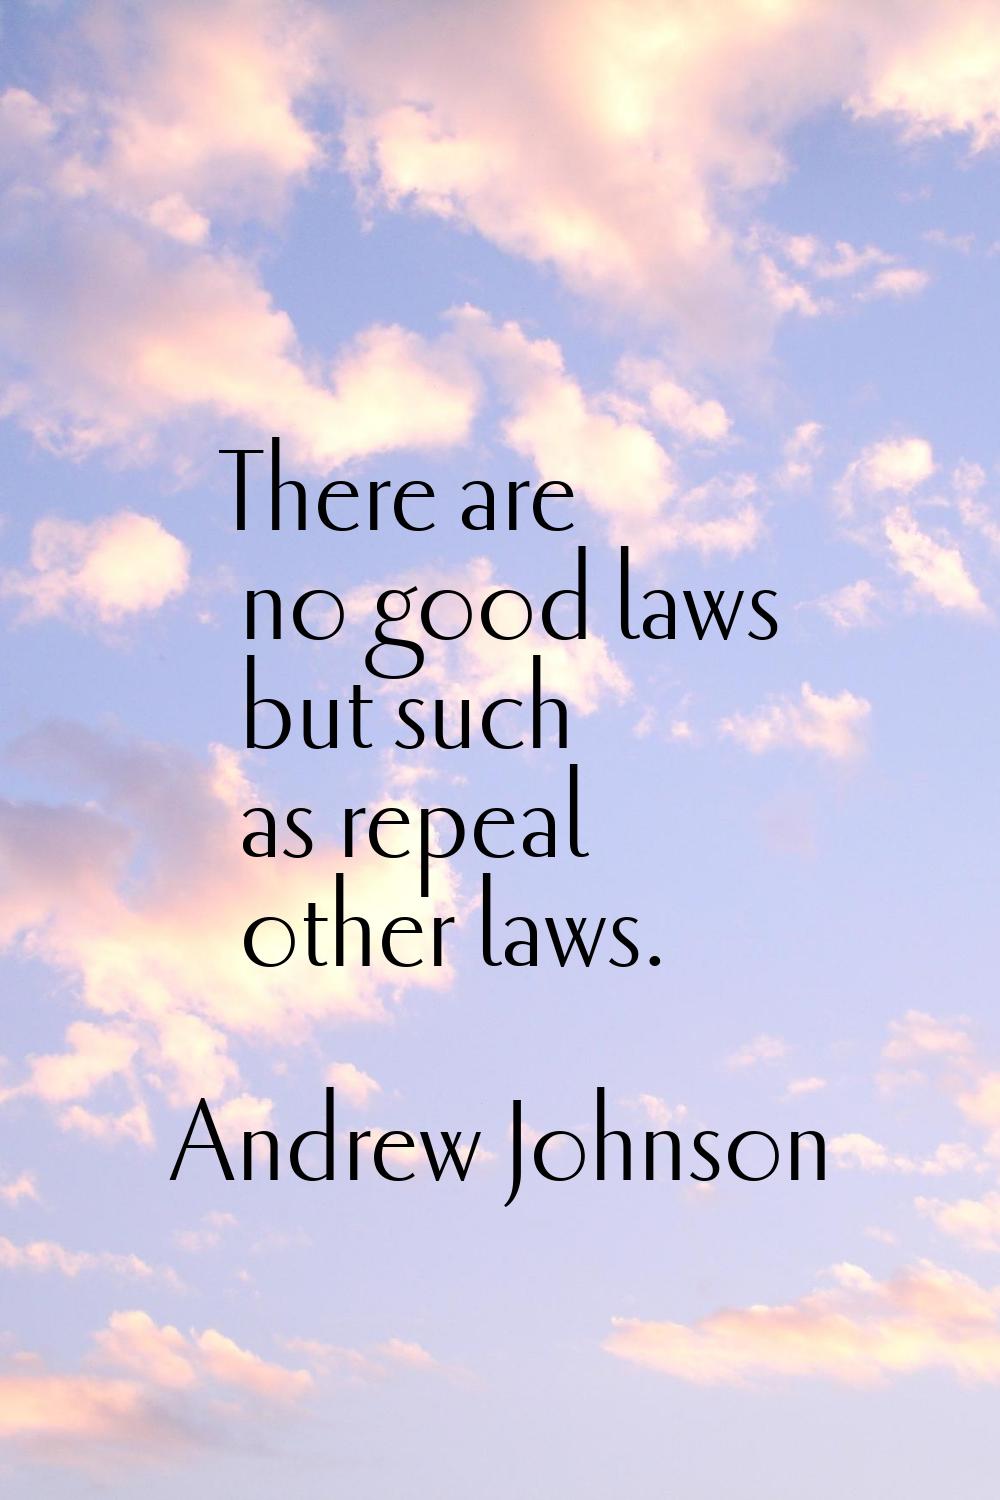 There are no good laws but such as repeal other laws.